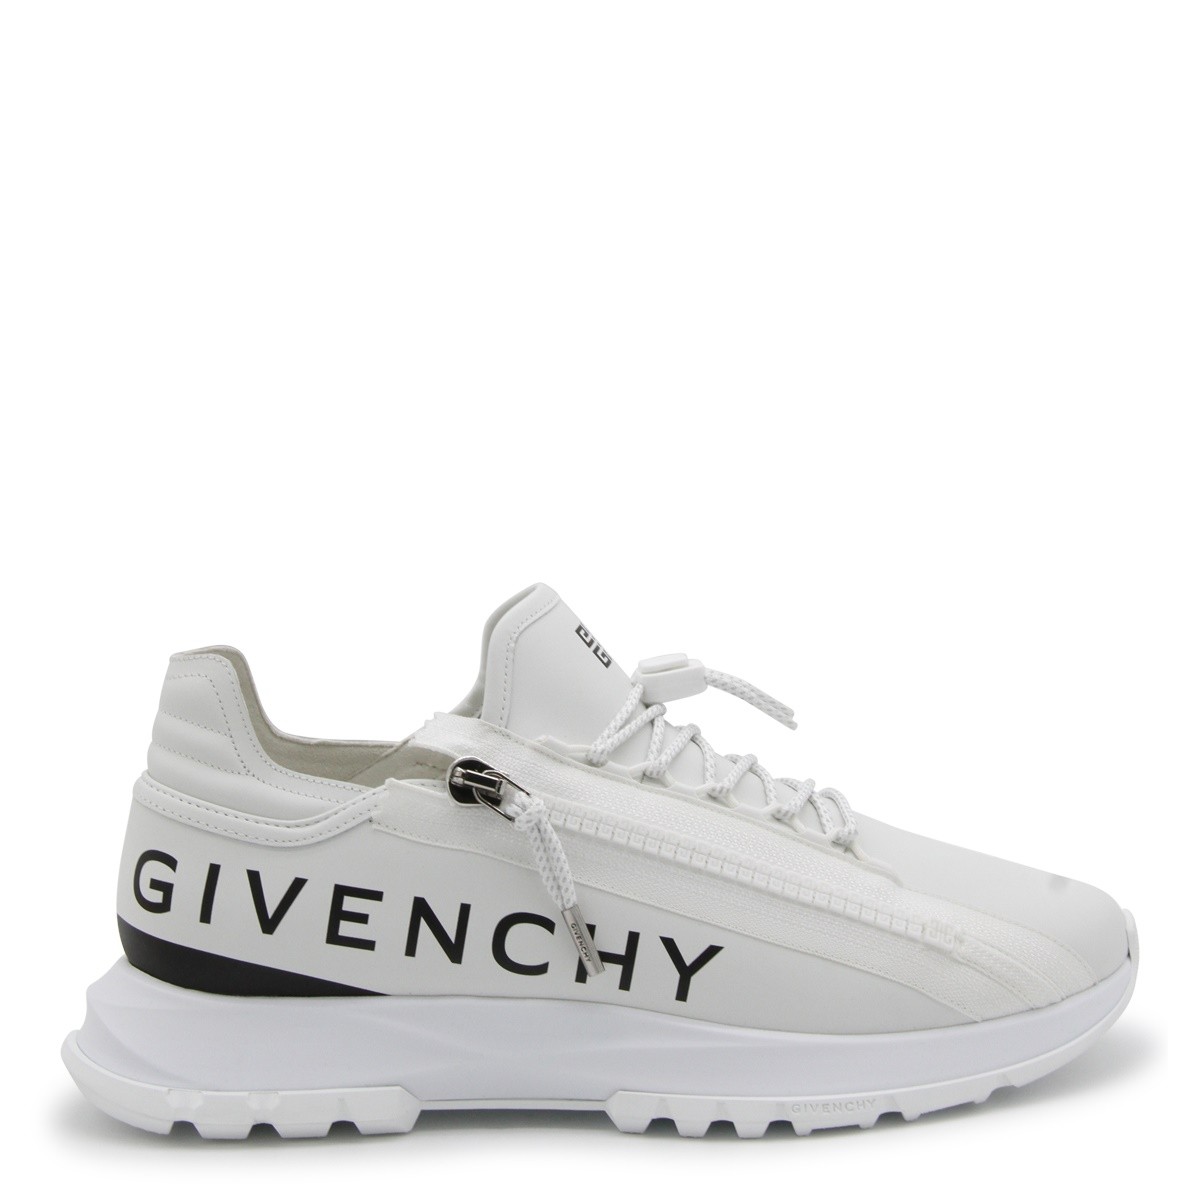 WHITE CANVAS AND LEATHER SPECTRE SNEAKERS